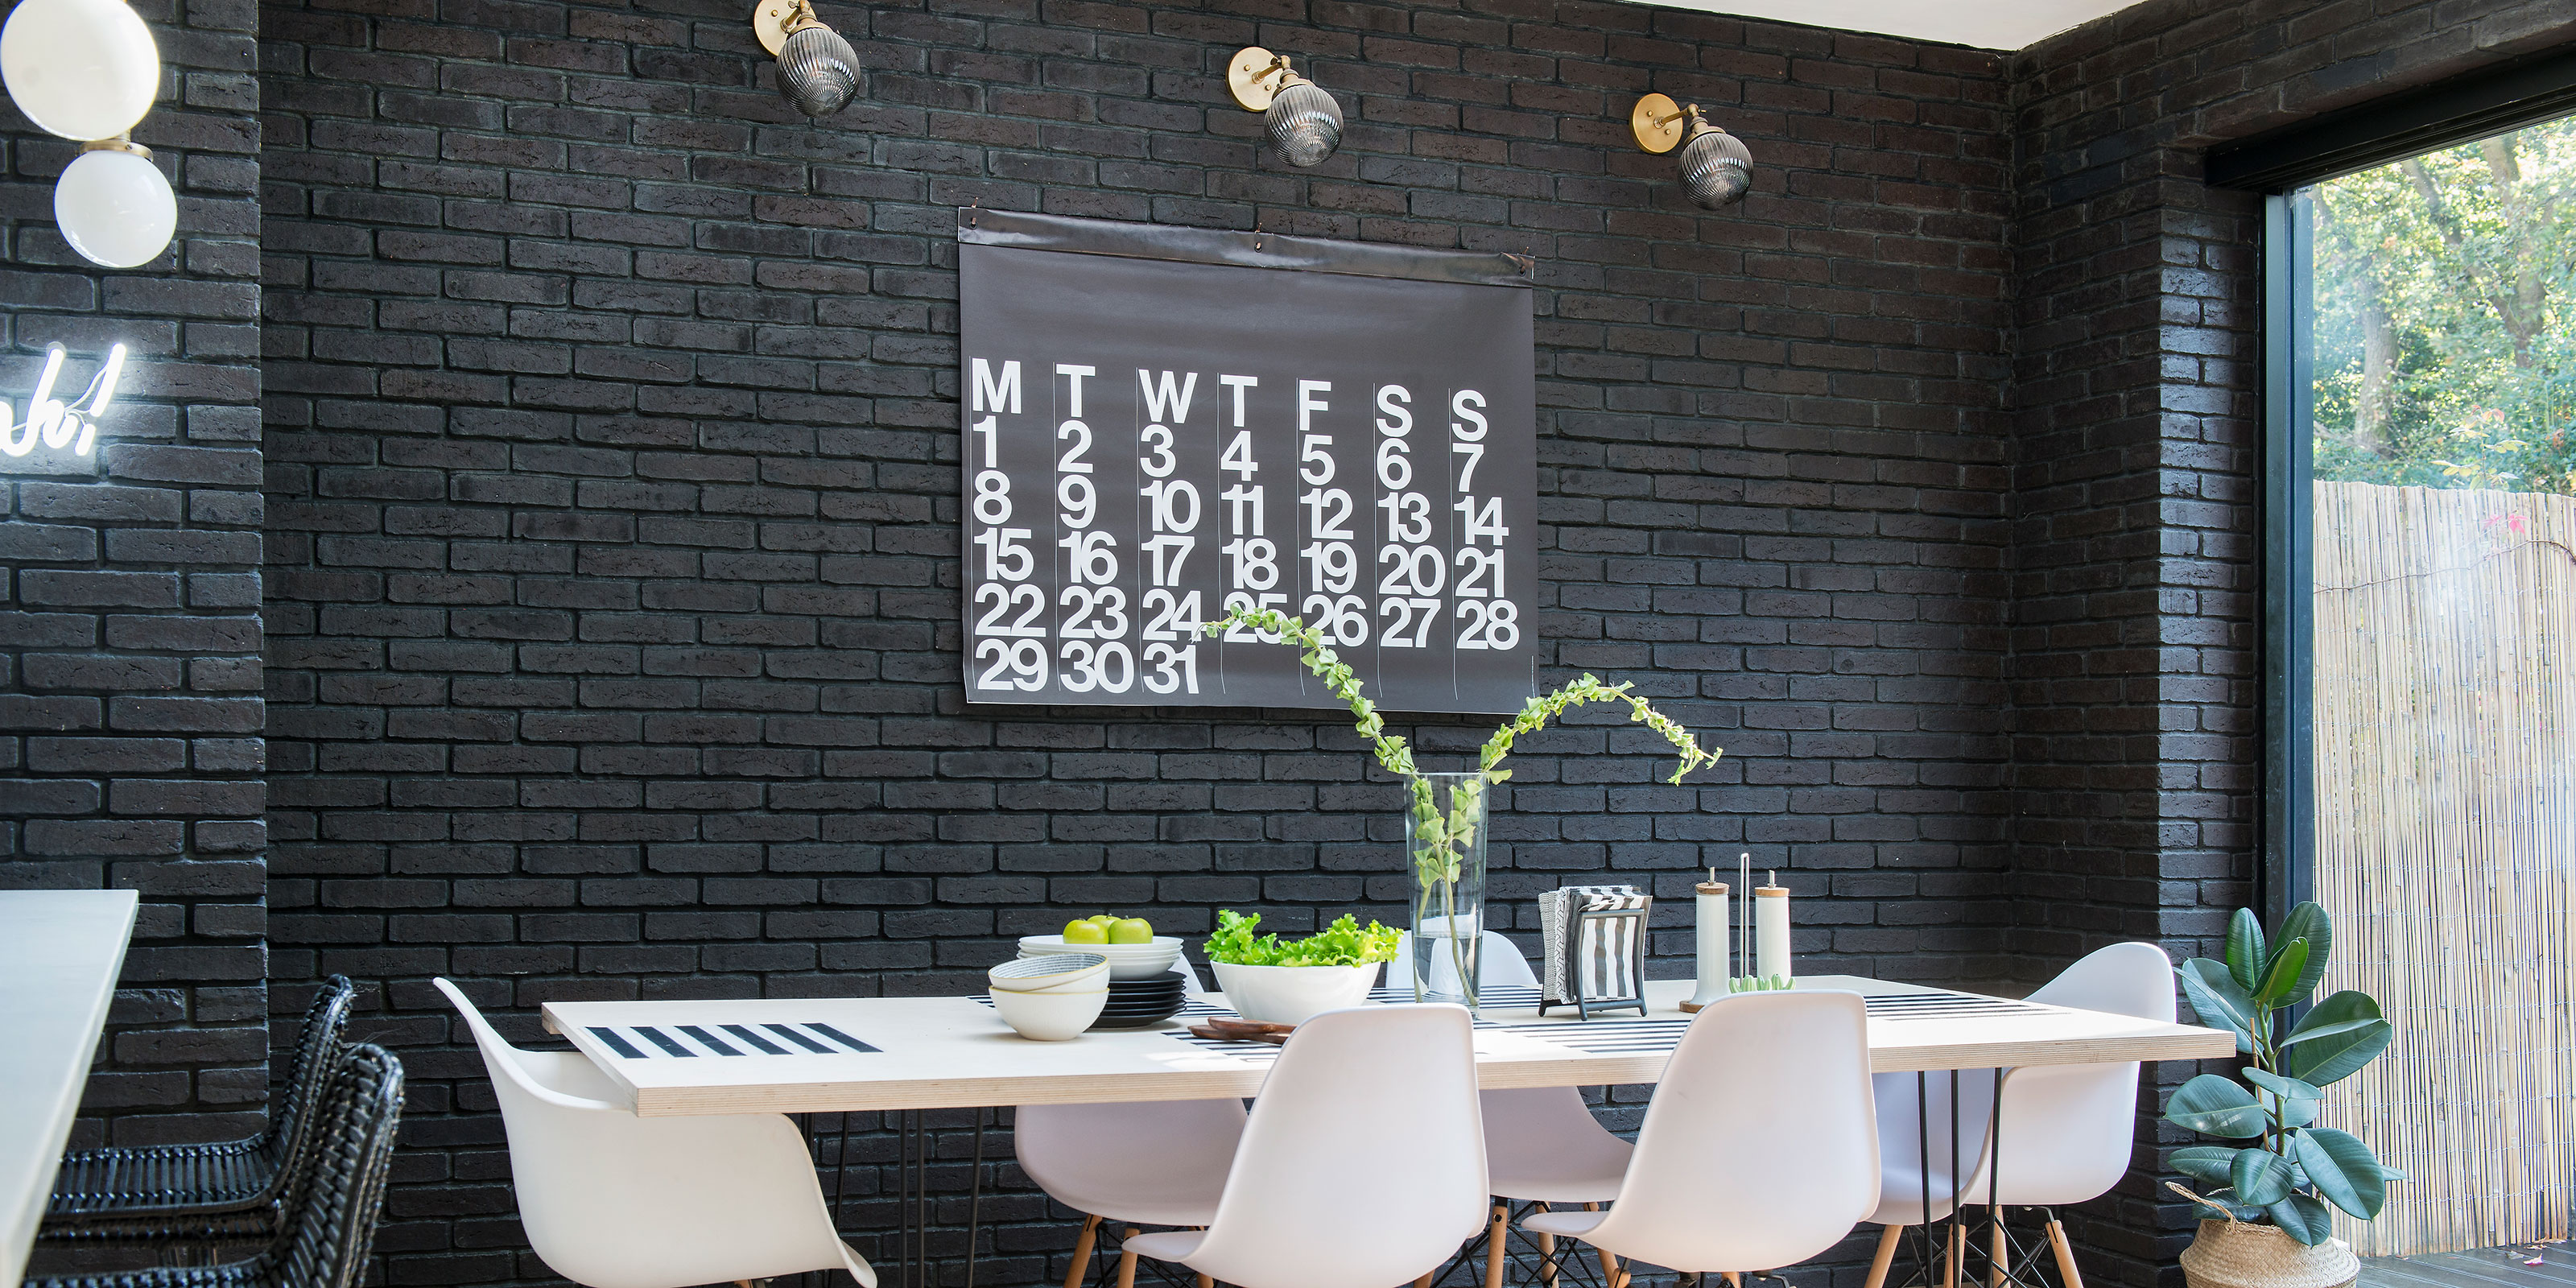 13 Dining Room Wall Decor Ideas To Add Style And Personality To A Blank  Space | Ideal Home